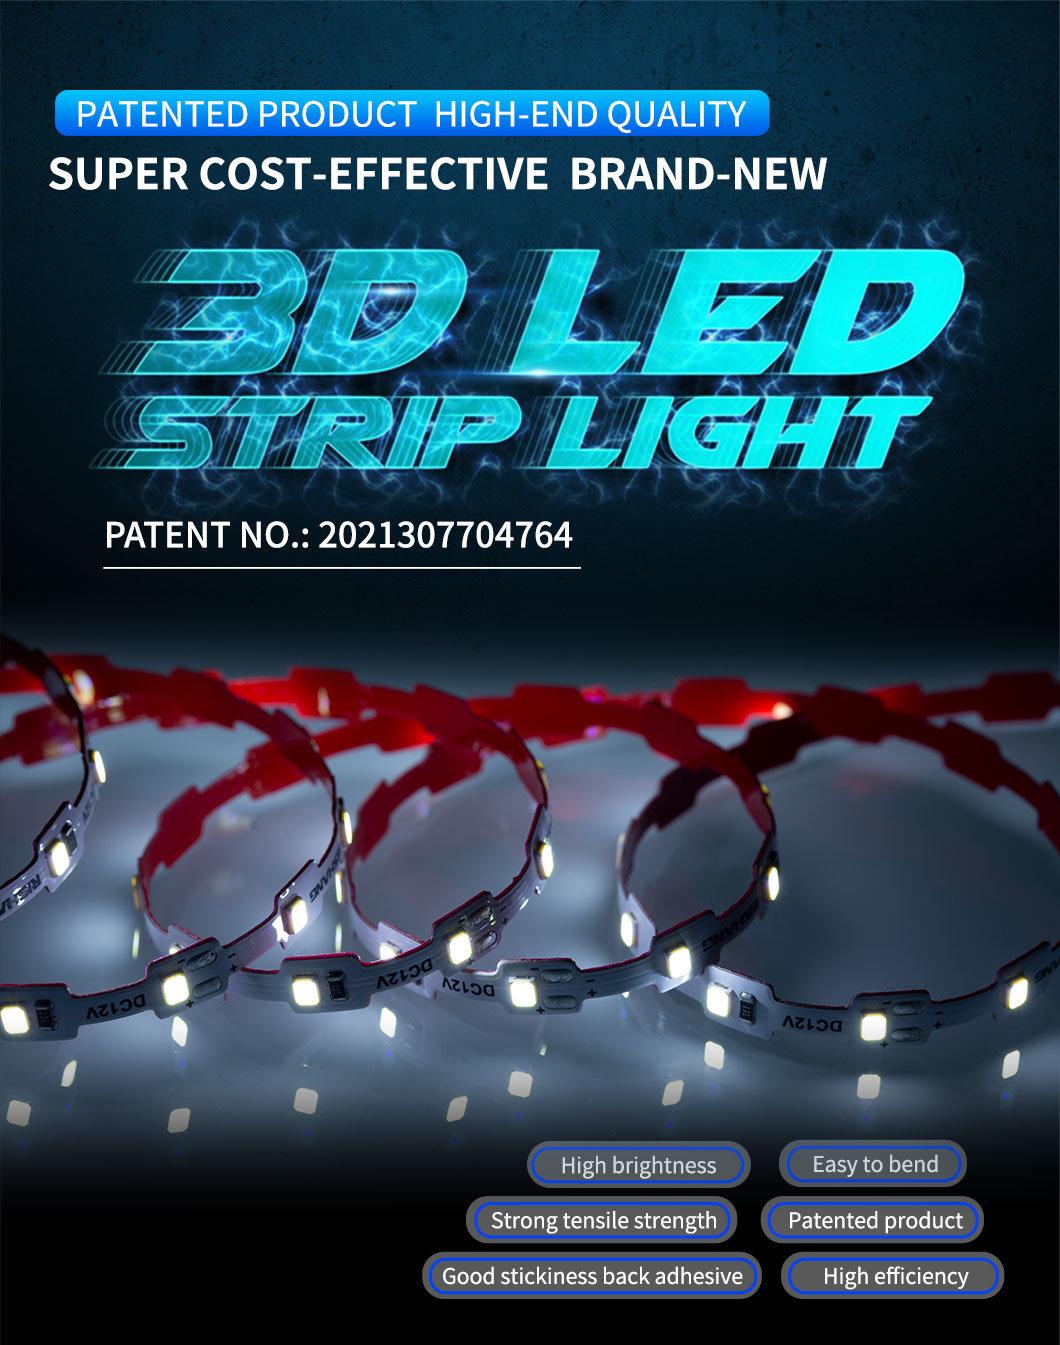 Good Quality Factory Wholesale 2 Years Warranty SMD2835 Single Color LED Strip Flexible Tape